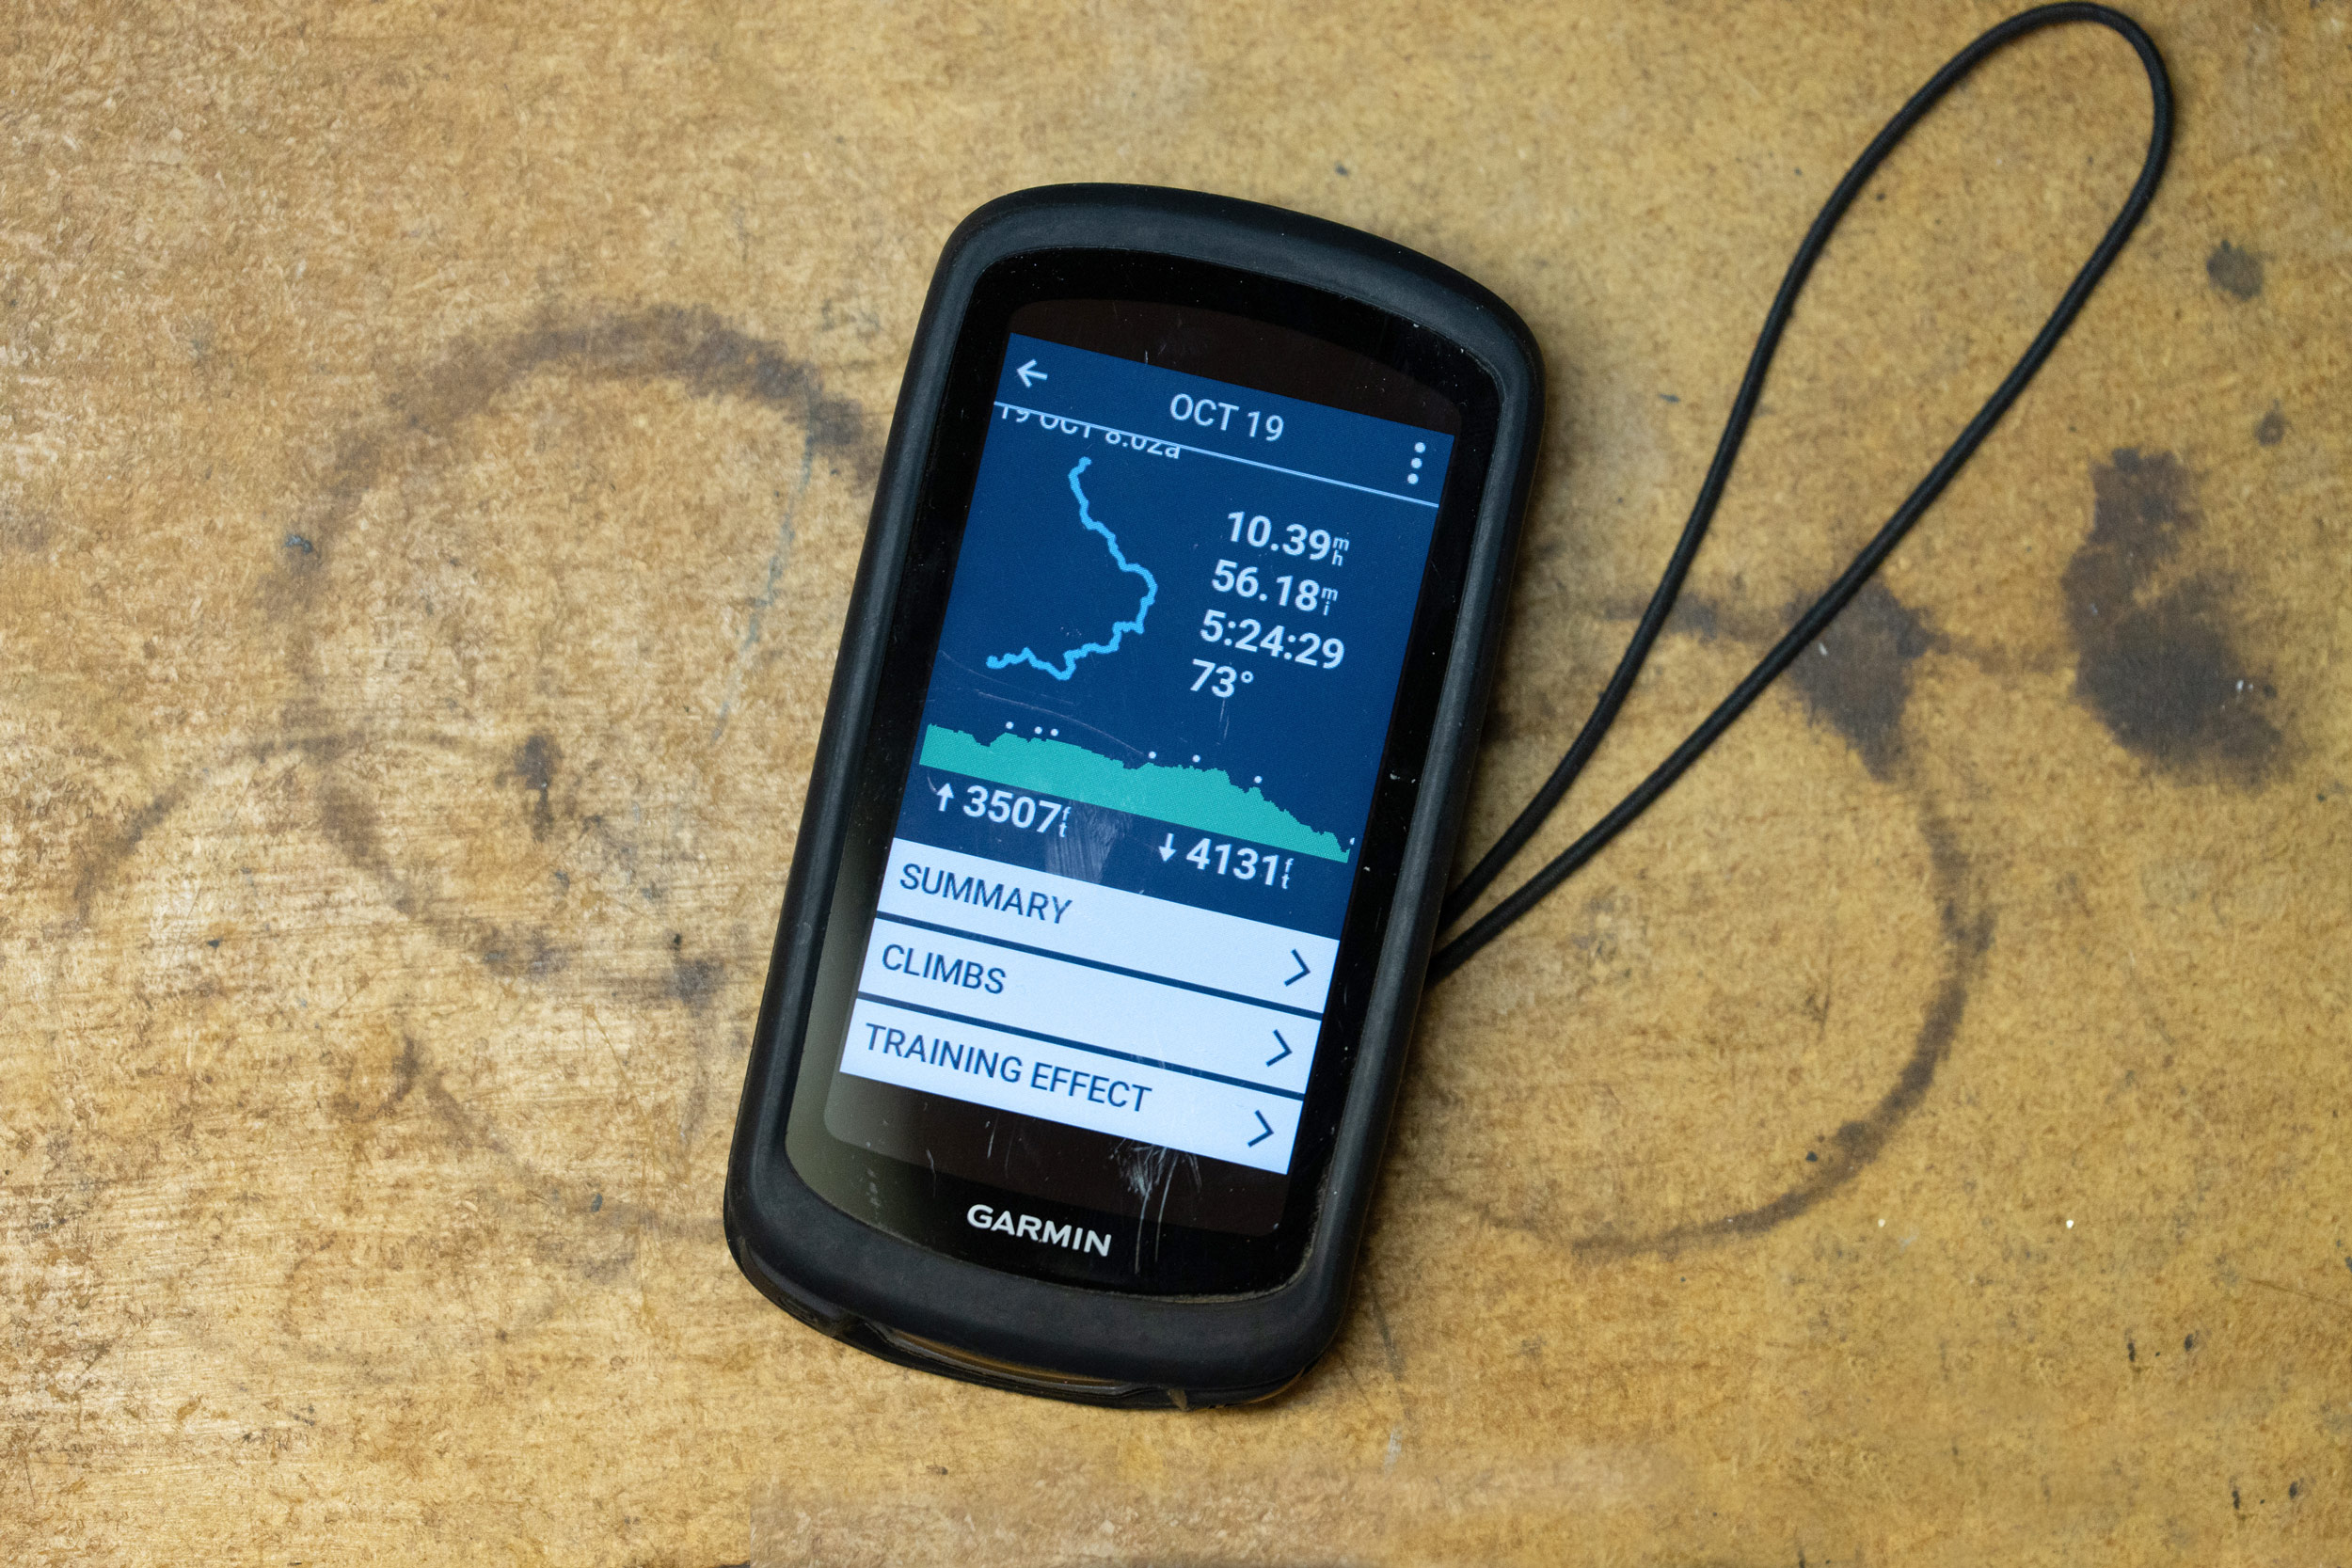 New Garmin Edge 1040 too expensive? Try these instead